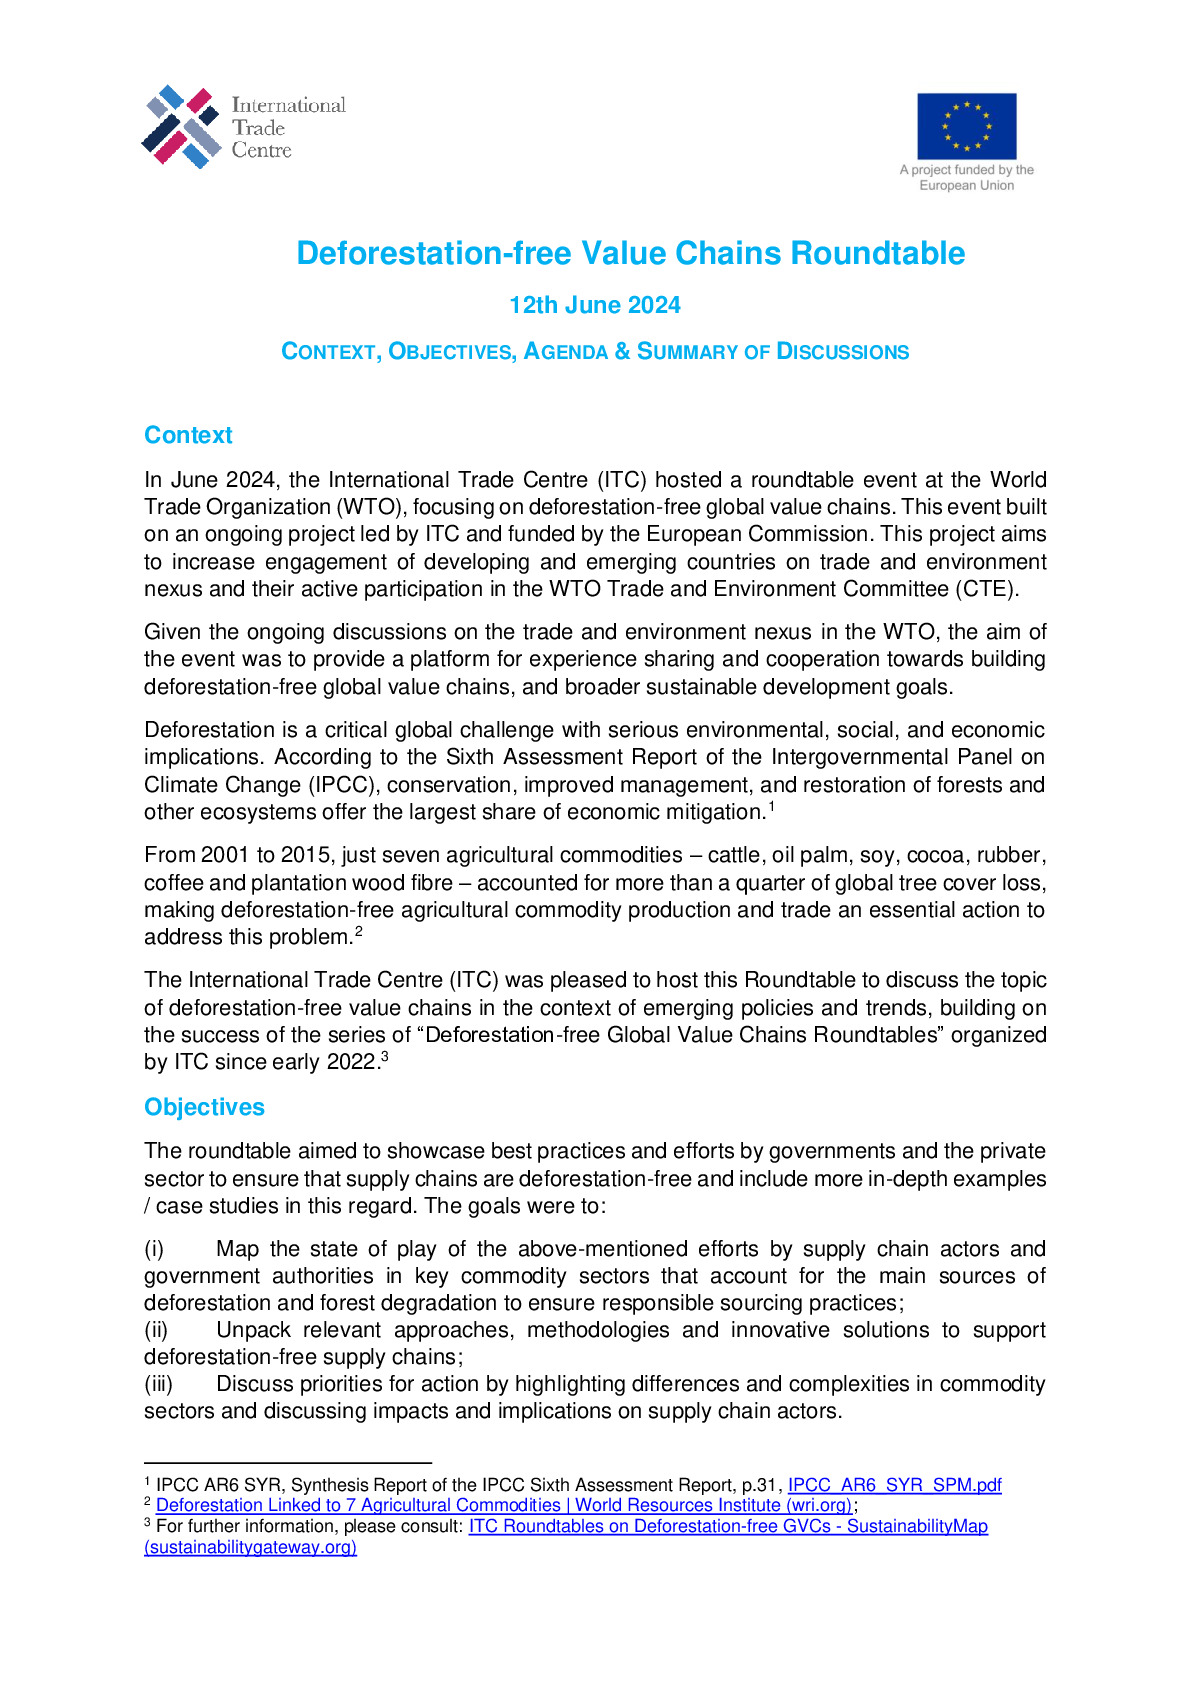 deforestation-free_value_chains_roundtable_draft-report_20.06